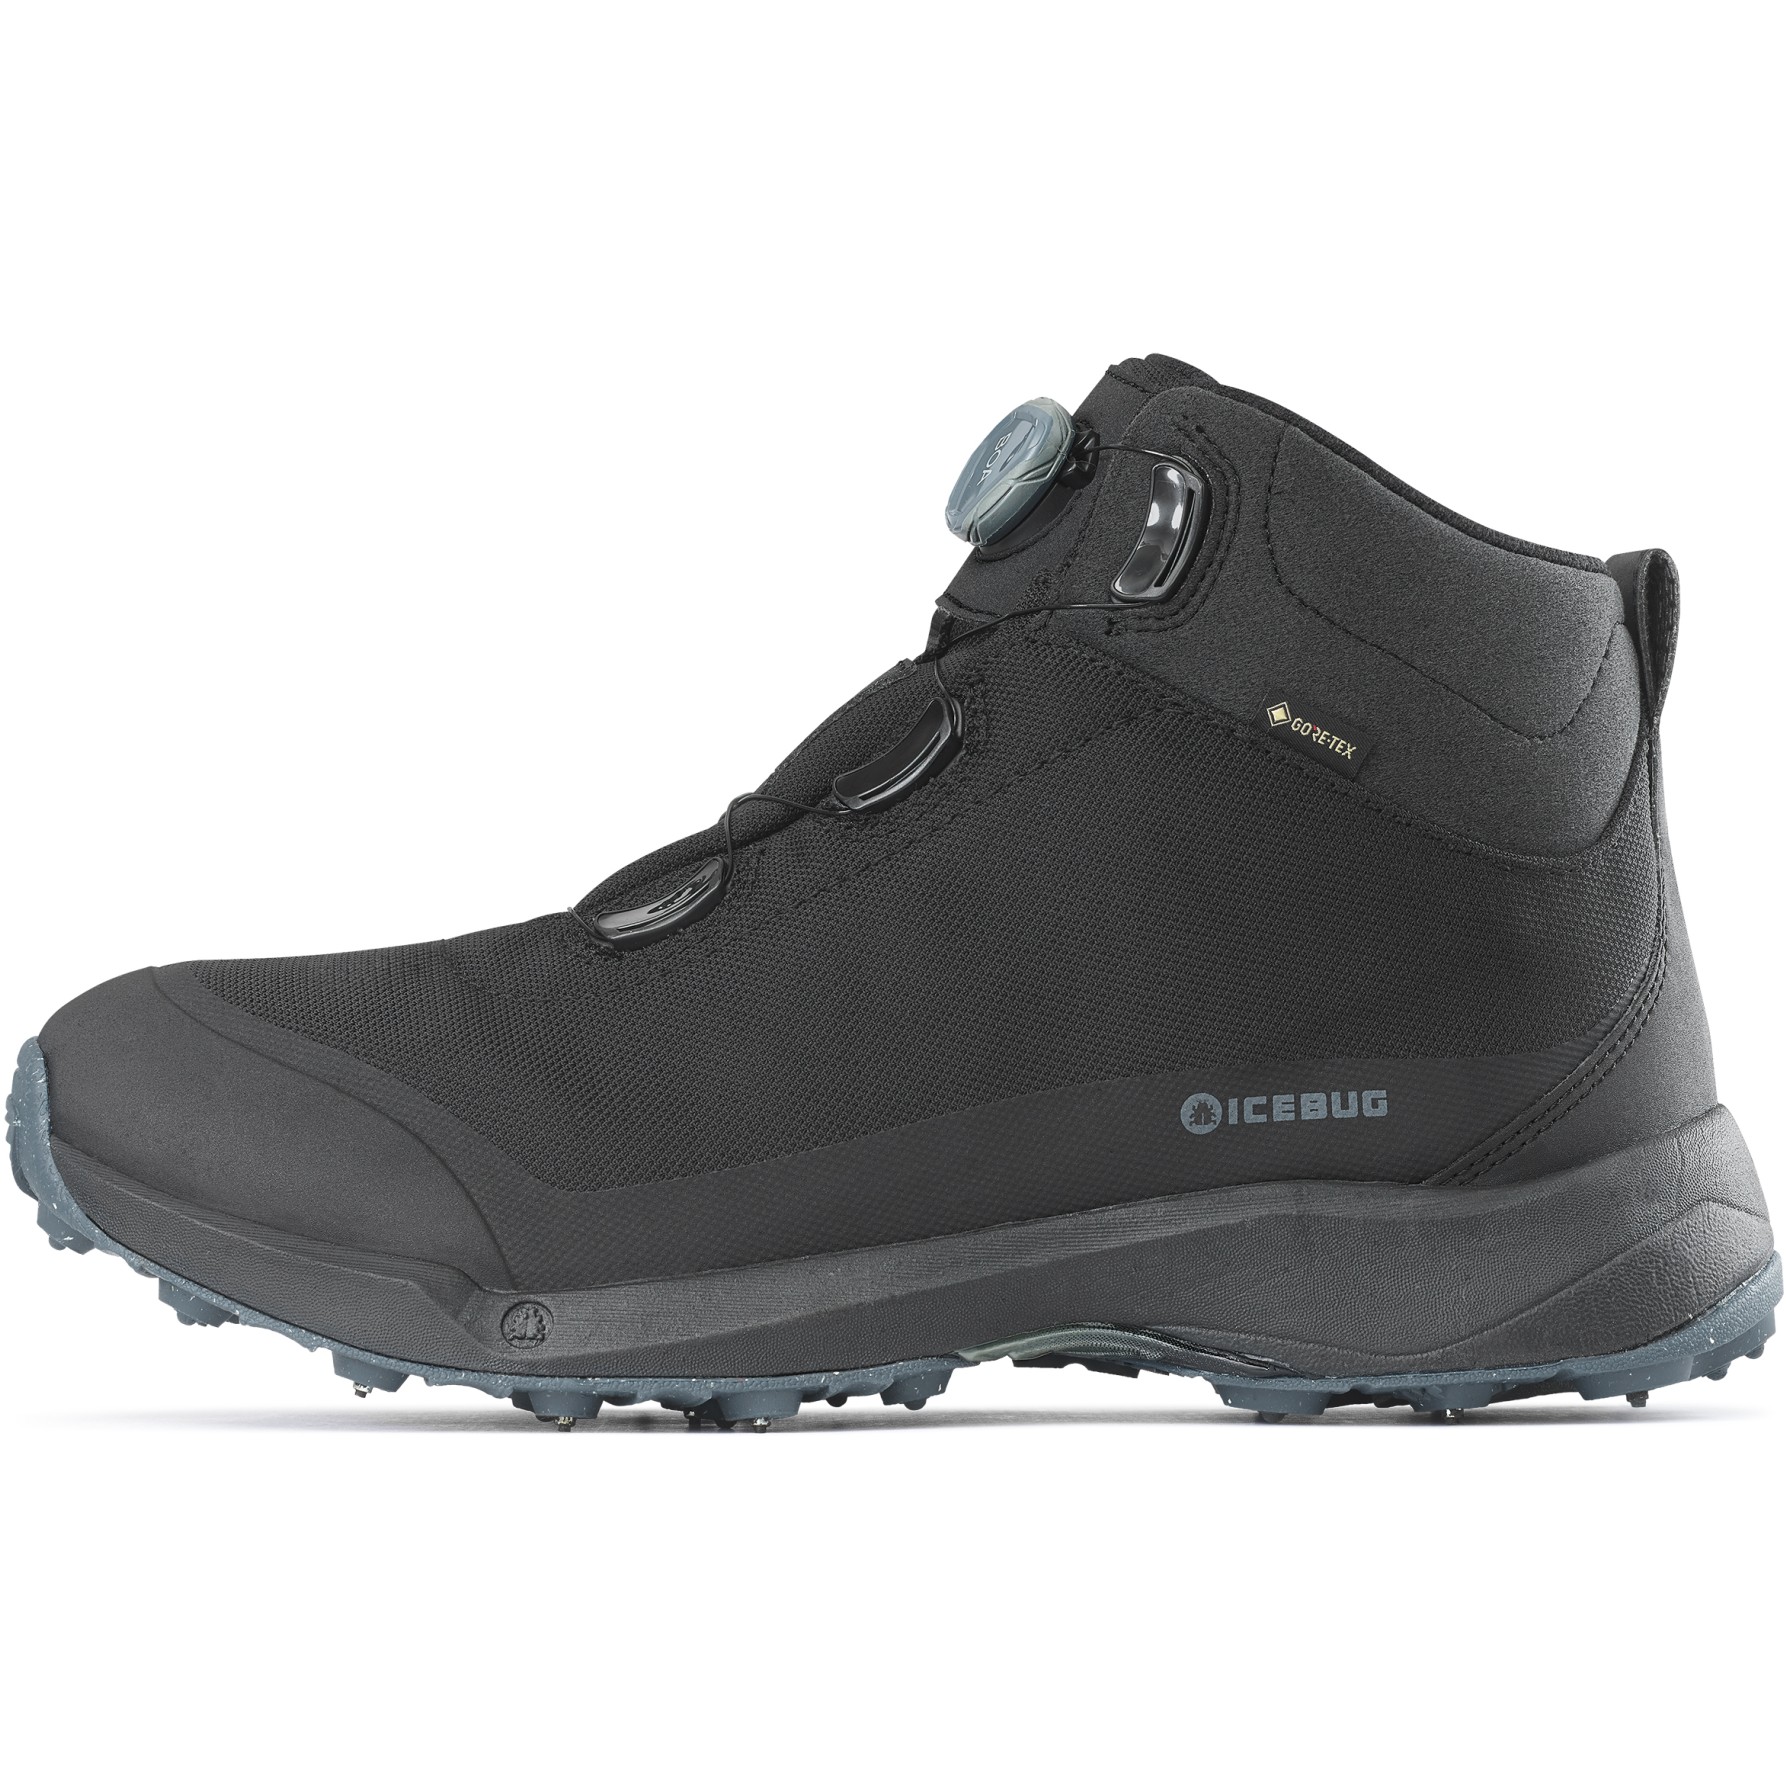 Picture of Icebug Stavre M BUGrip GTX Winter Hiking Boots - Black/Petroleum